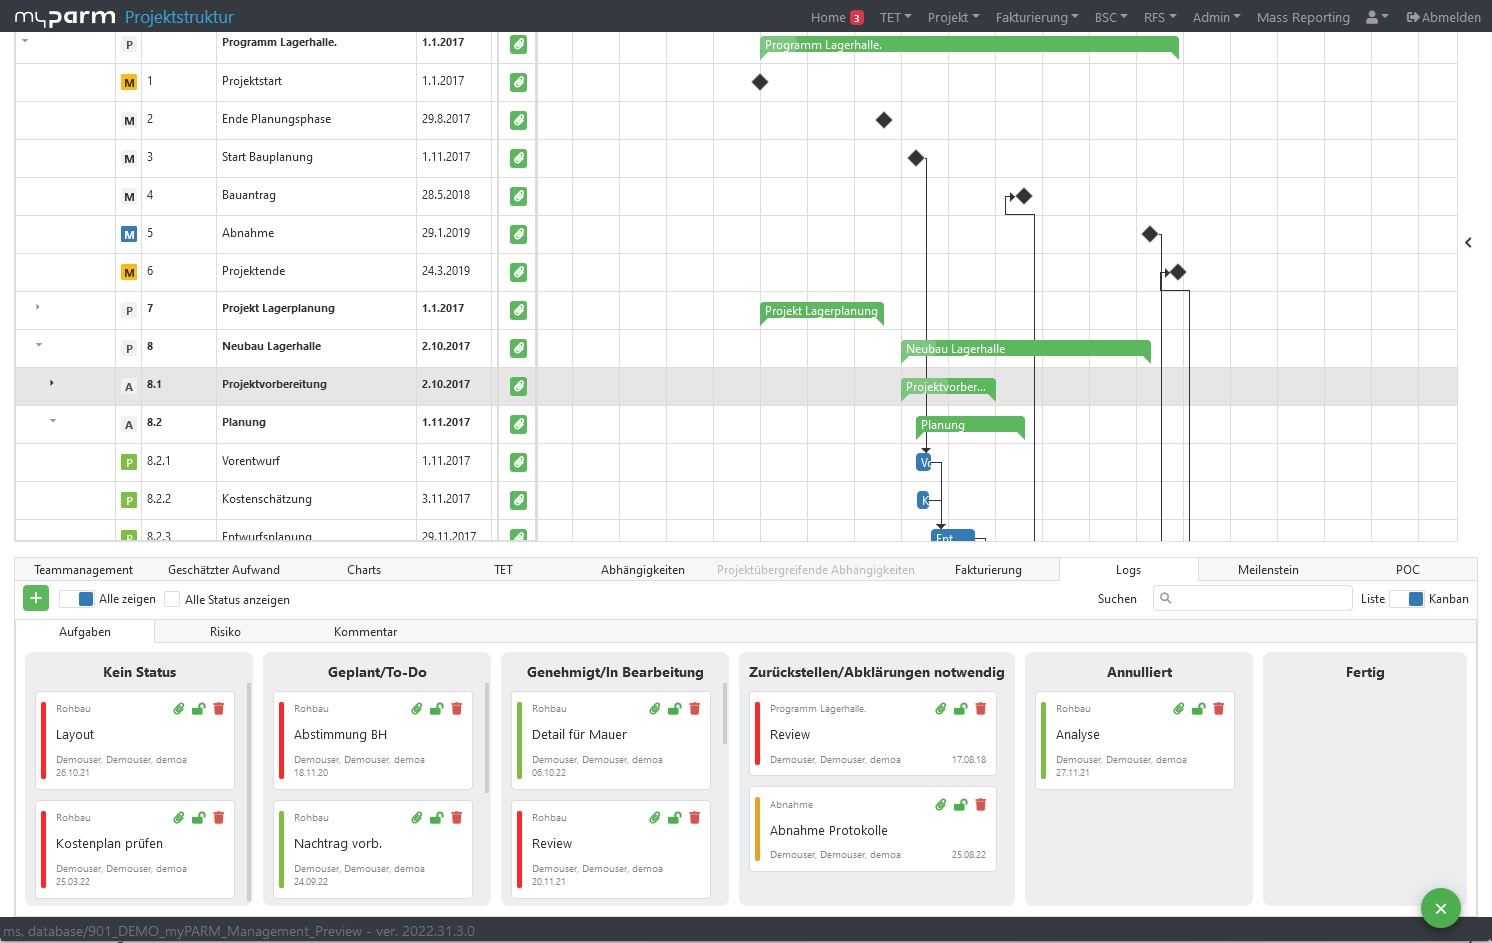 Project management with Gantt chart and Kanban board